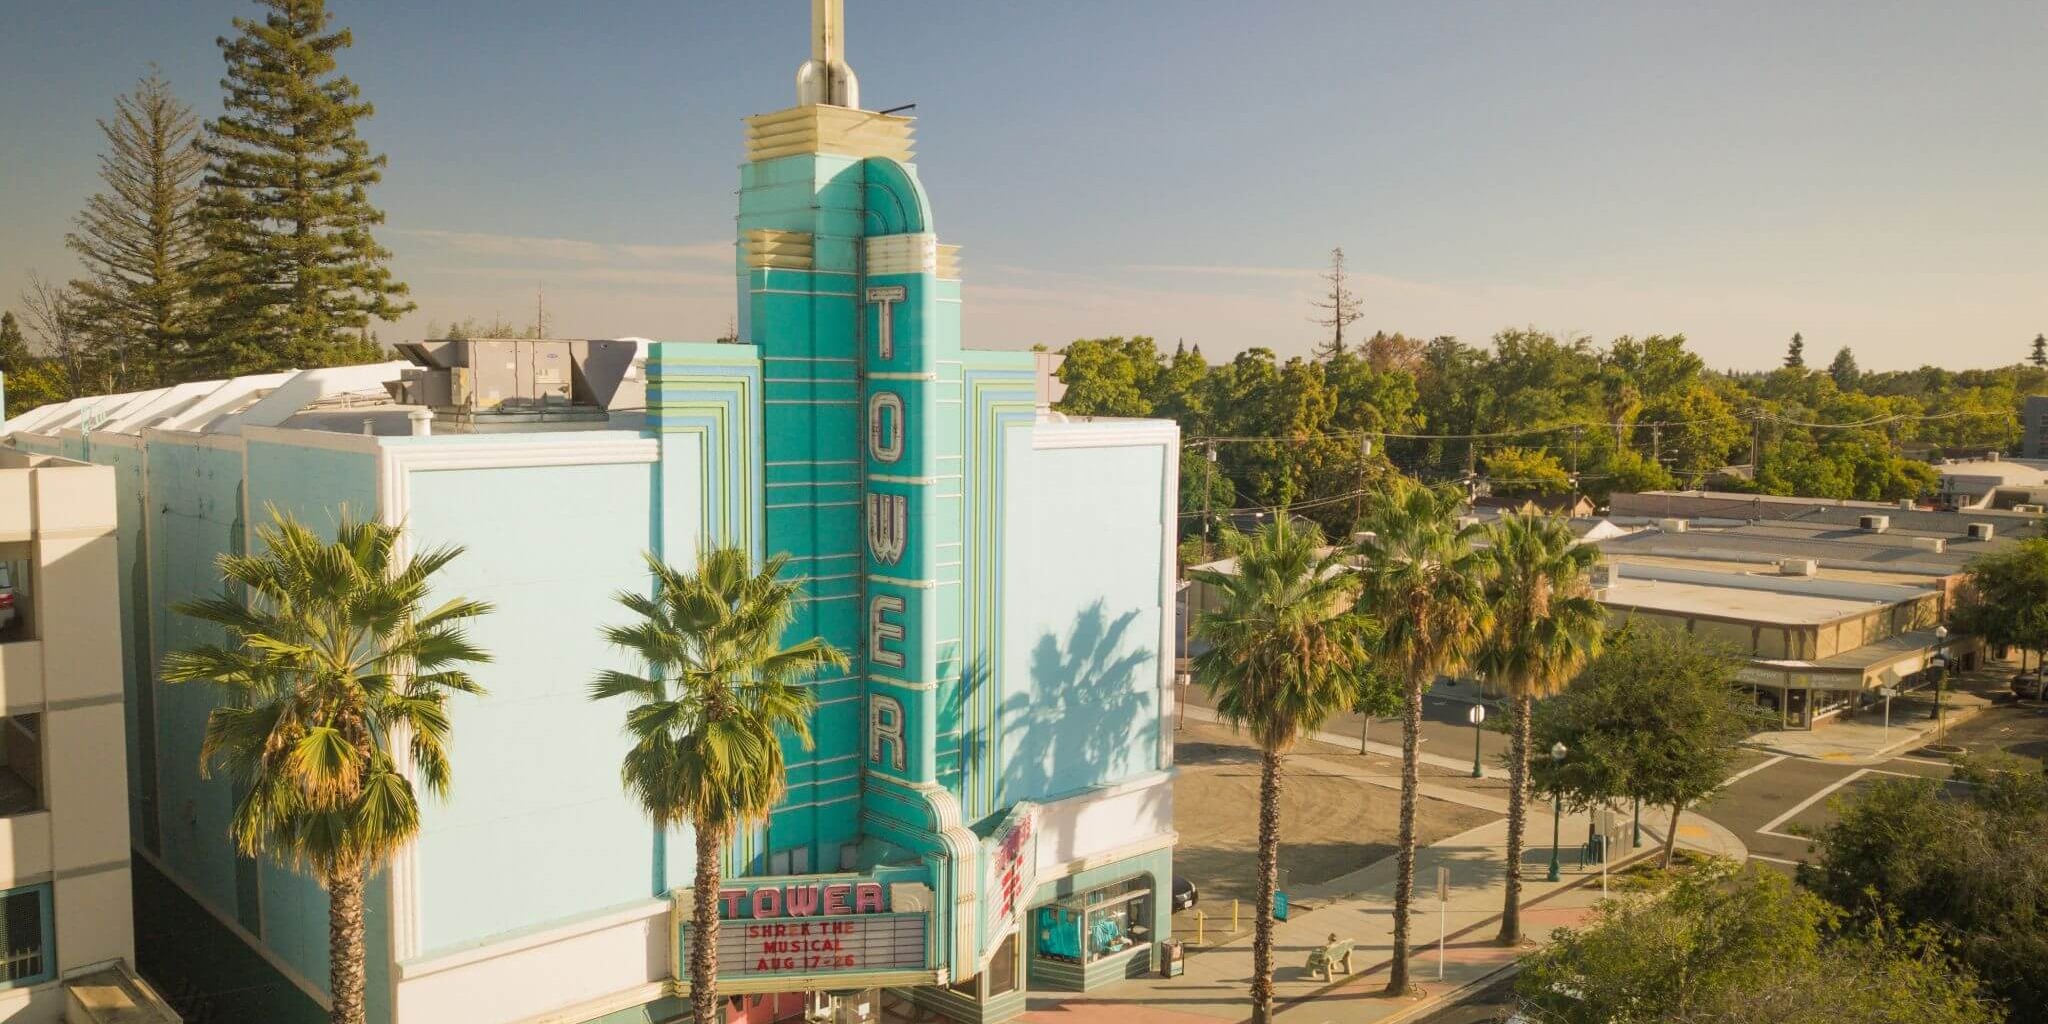 TOWER THEATRE